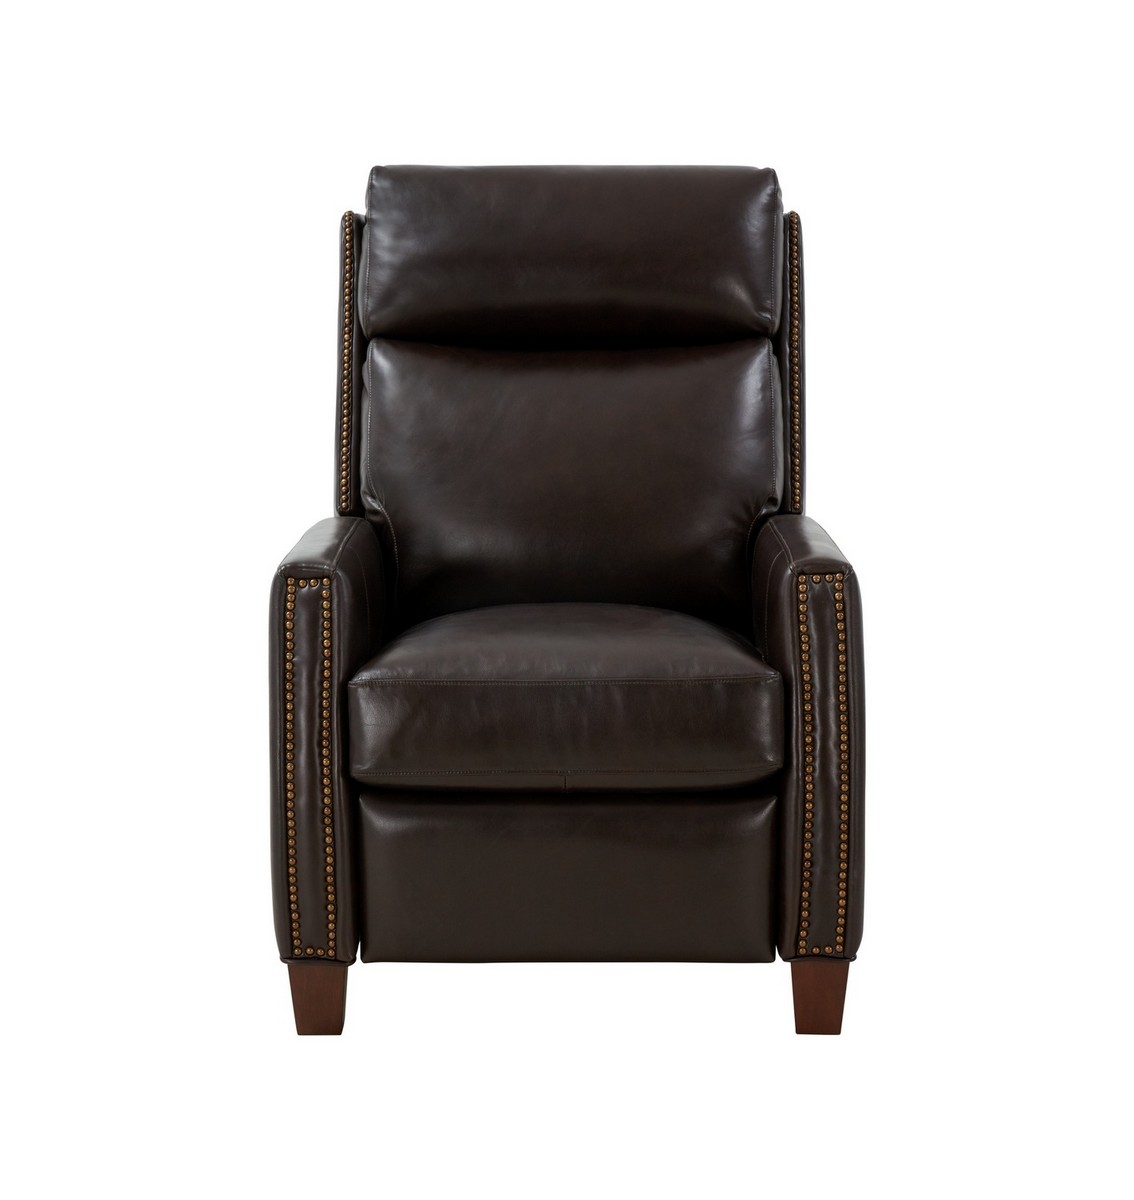 Barcalounger Anaheim Big and Tall Power Recliner Chair with Power Head Rest and Lumbar - Bennington Fudge/All Leather